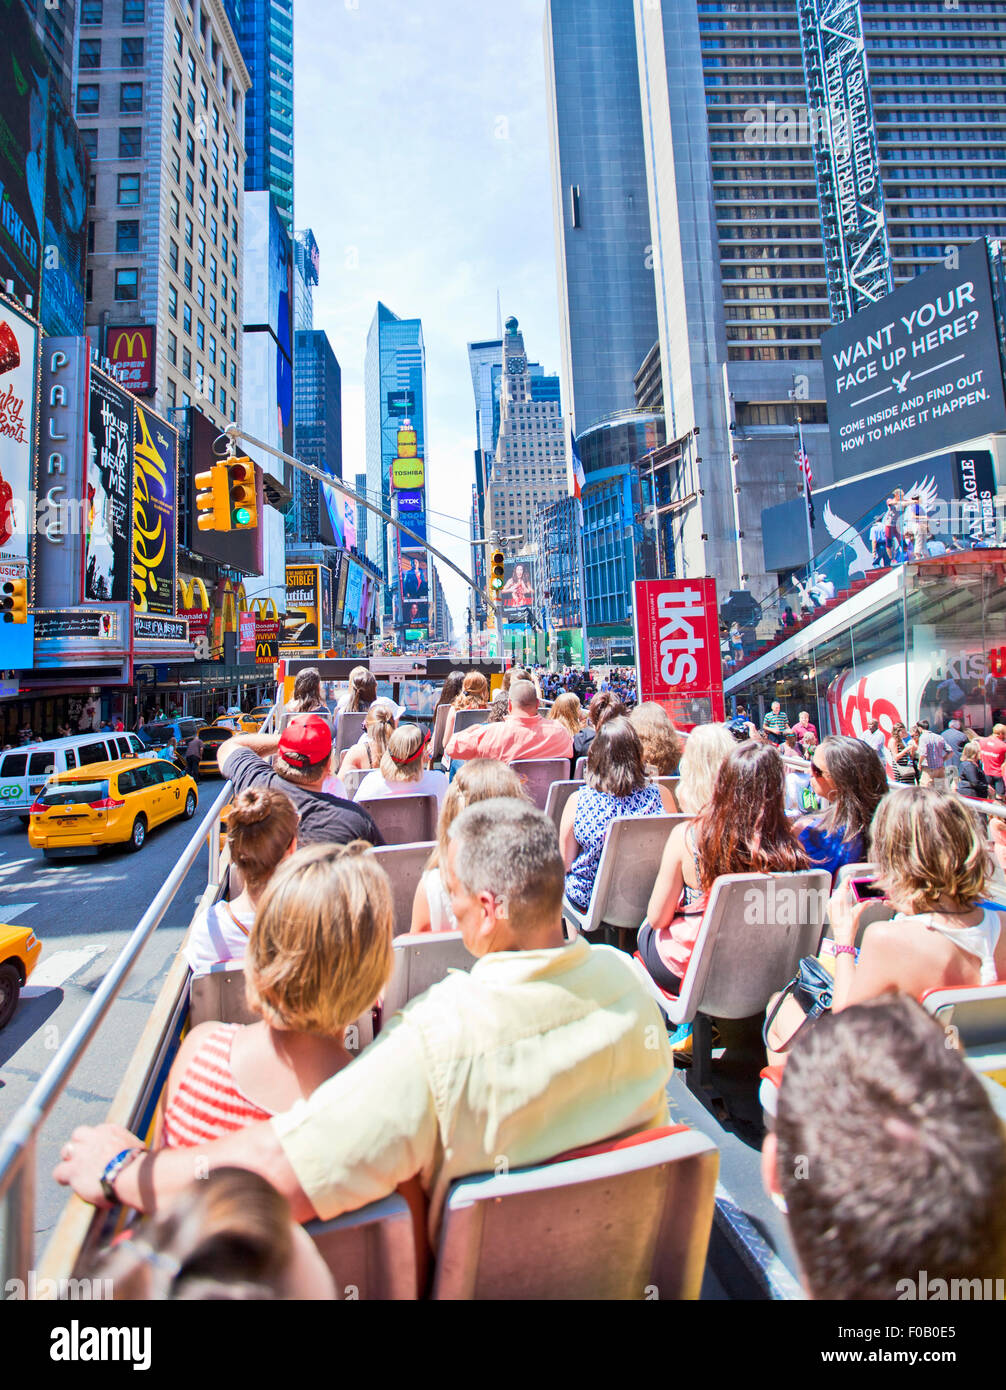 NEW YORK, USA - JUNE 28th 2014: Tourists taking a tour bus enjoying the sights of Times Square Stock Photo